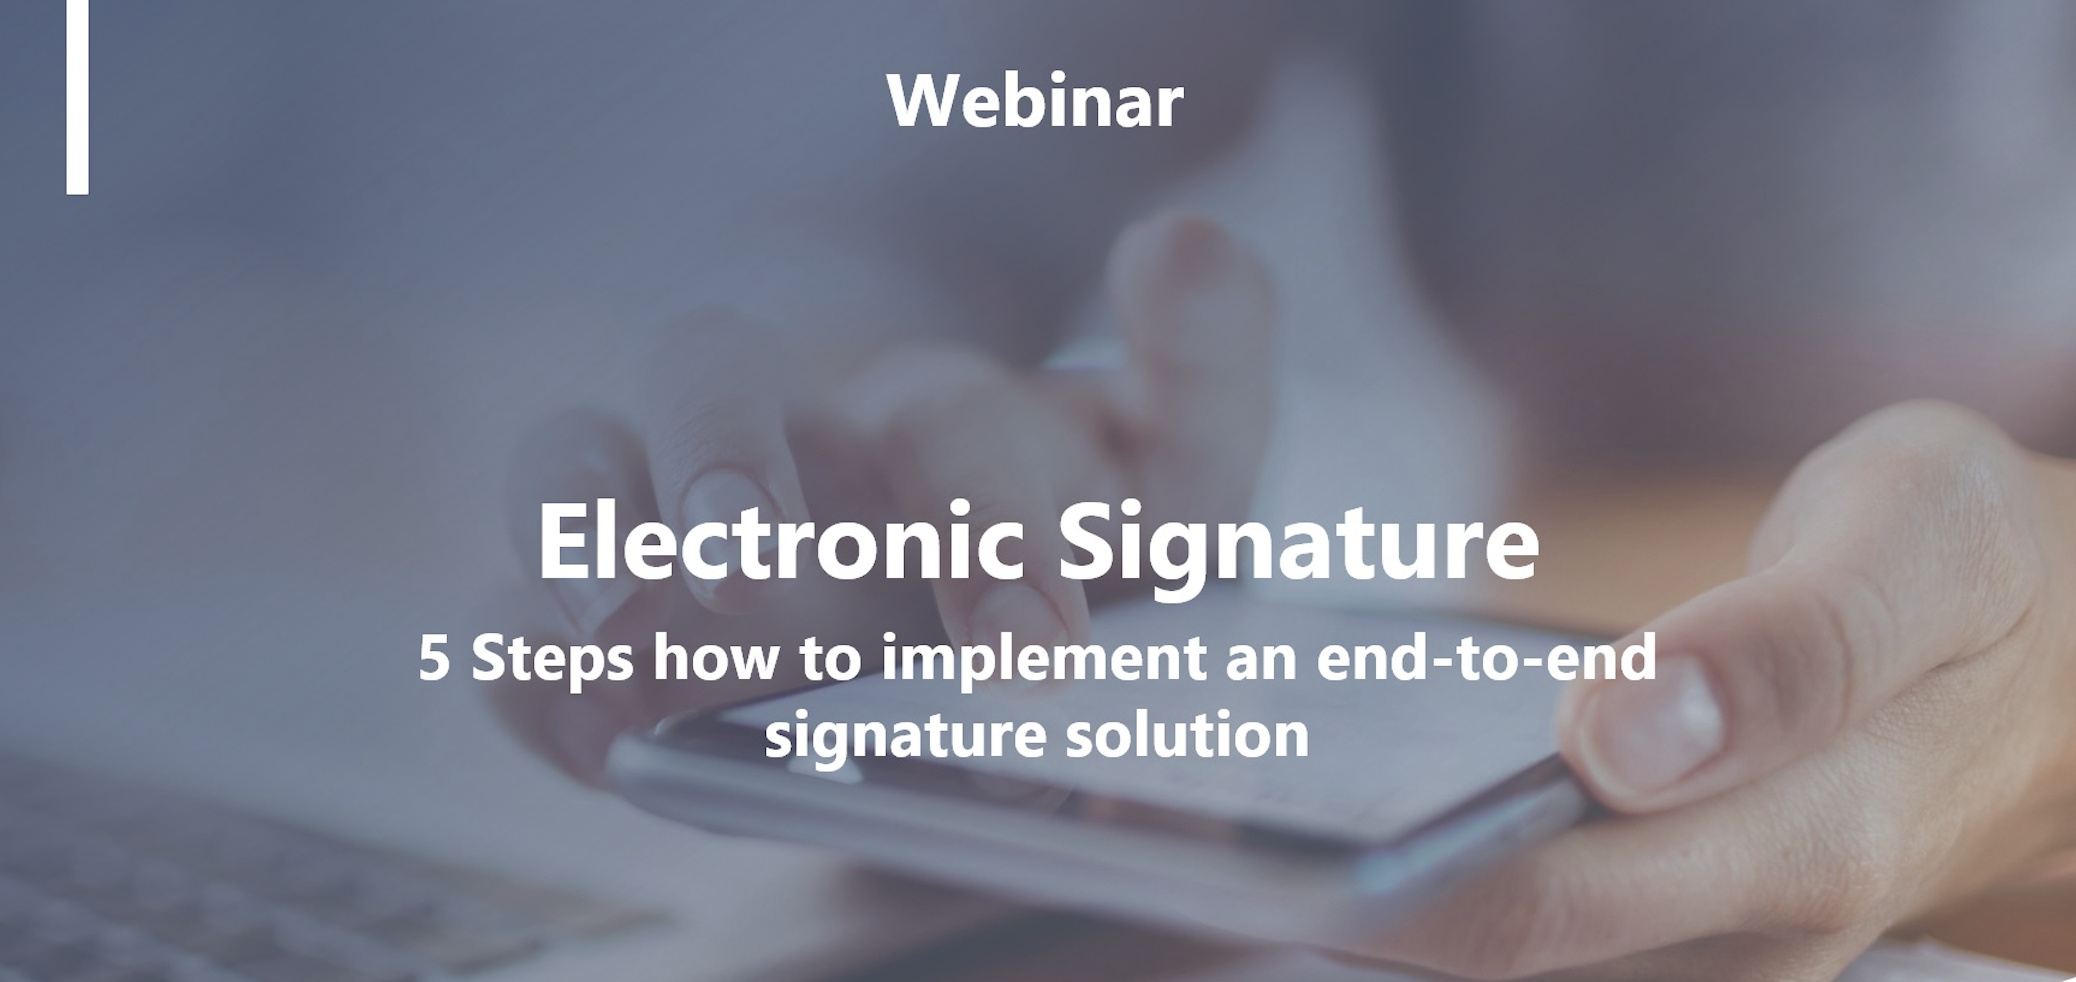 Webinar: Electronic Signature - For you in only 5 steps